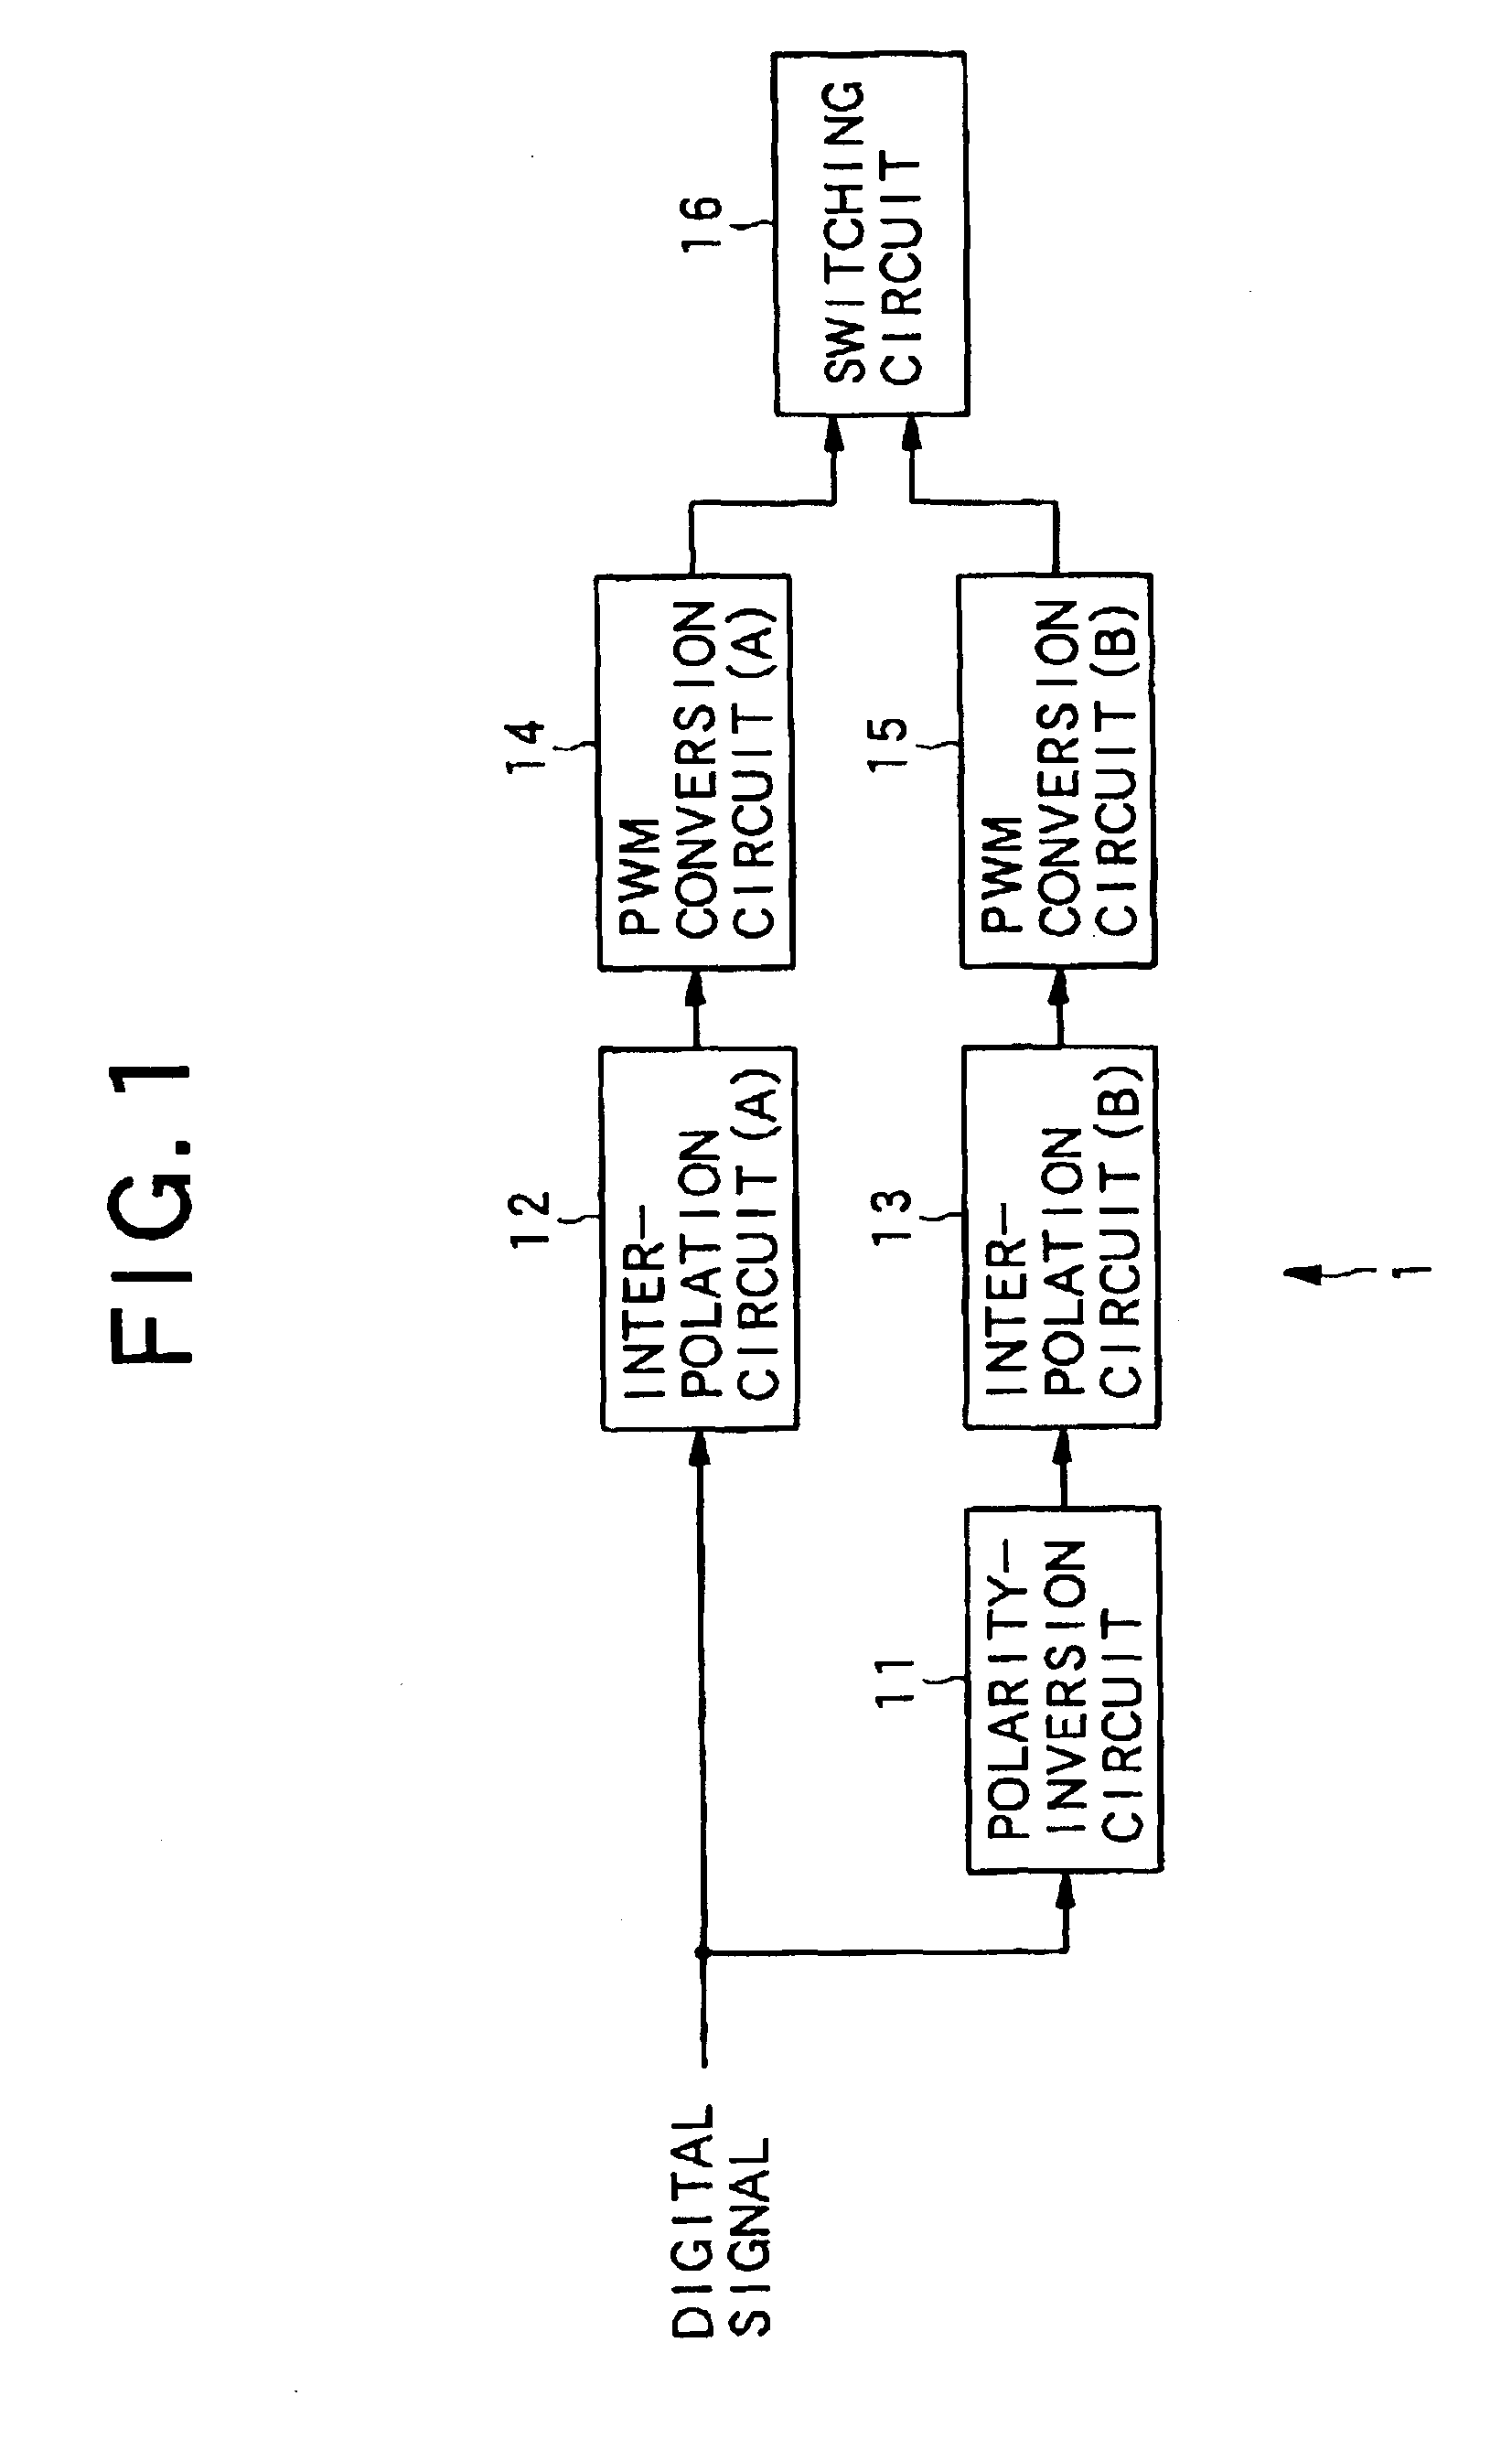 Digital signal conversion apparatus, digital signal conversion method, and computer-readable recording medium in which digital signal conversion program is recorded